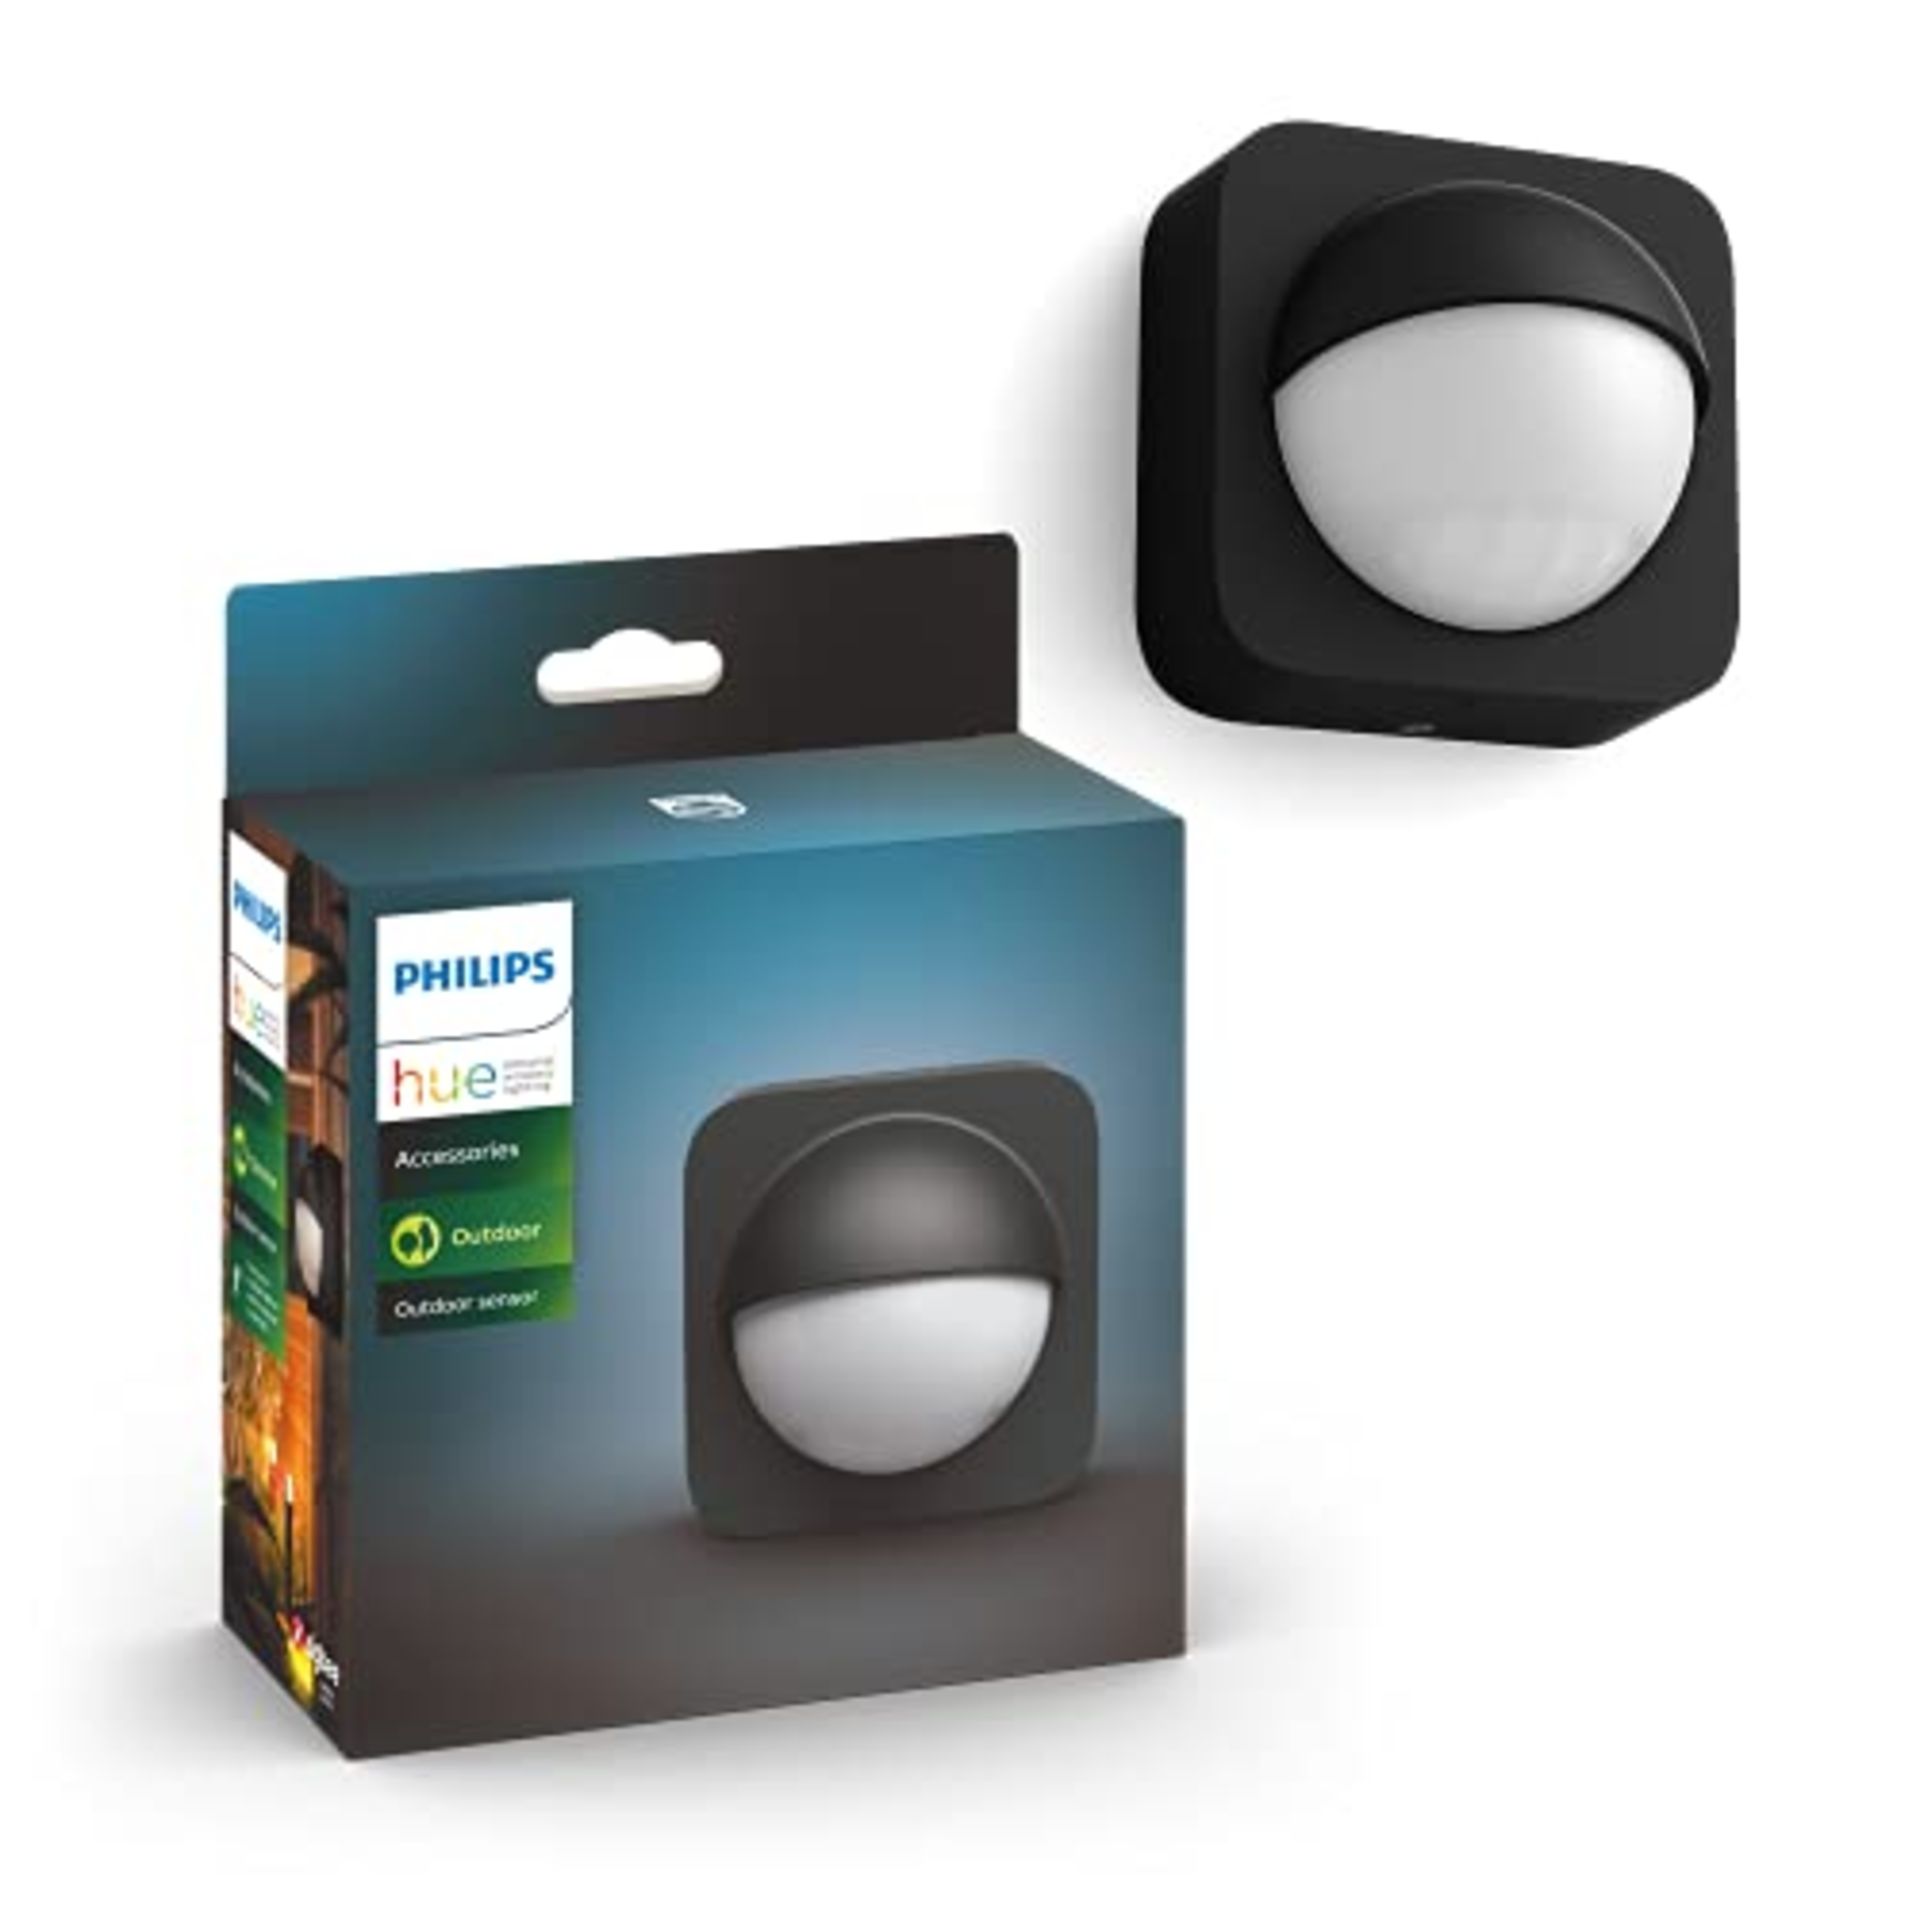 RRP £54.00 Philips Hue Outdoor Motion Sensor. Smart Lighting Accessory for Outdoor Light Control.